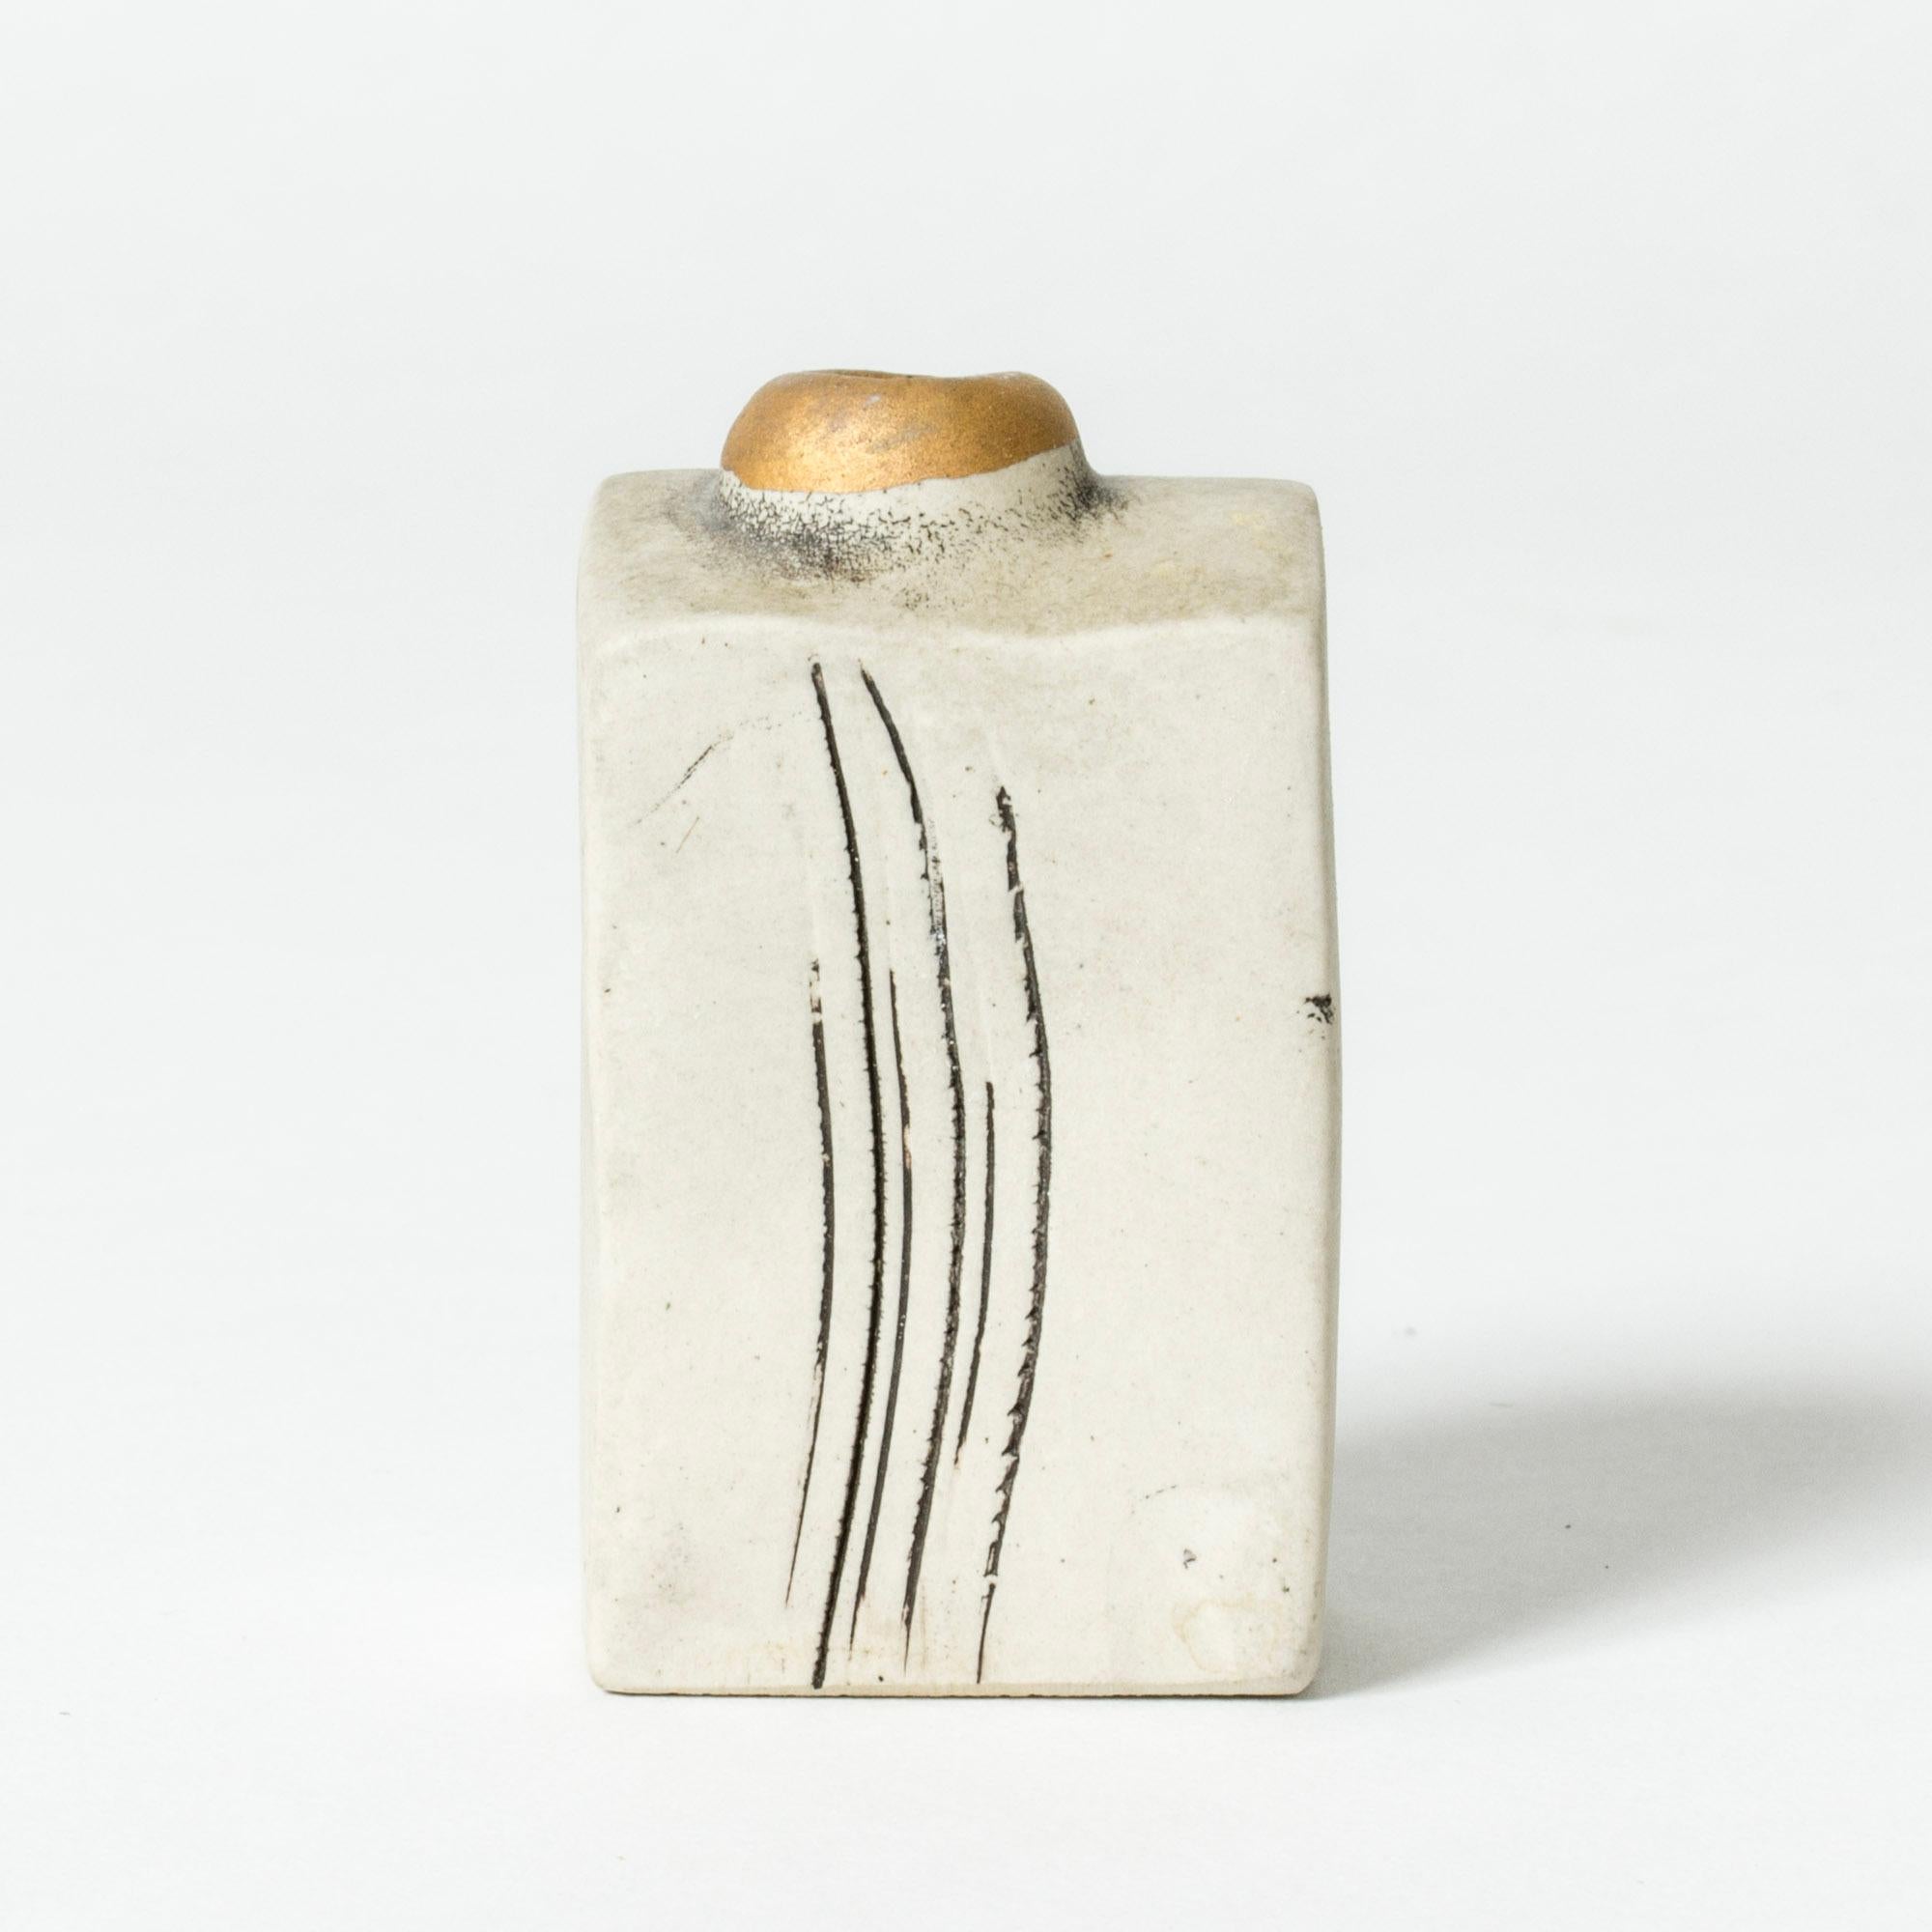 Small stoneware sculpture by Bengt Berglund in a boxy form with a striped decor and a gold glazed “mouth” on top.